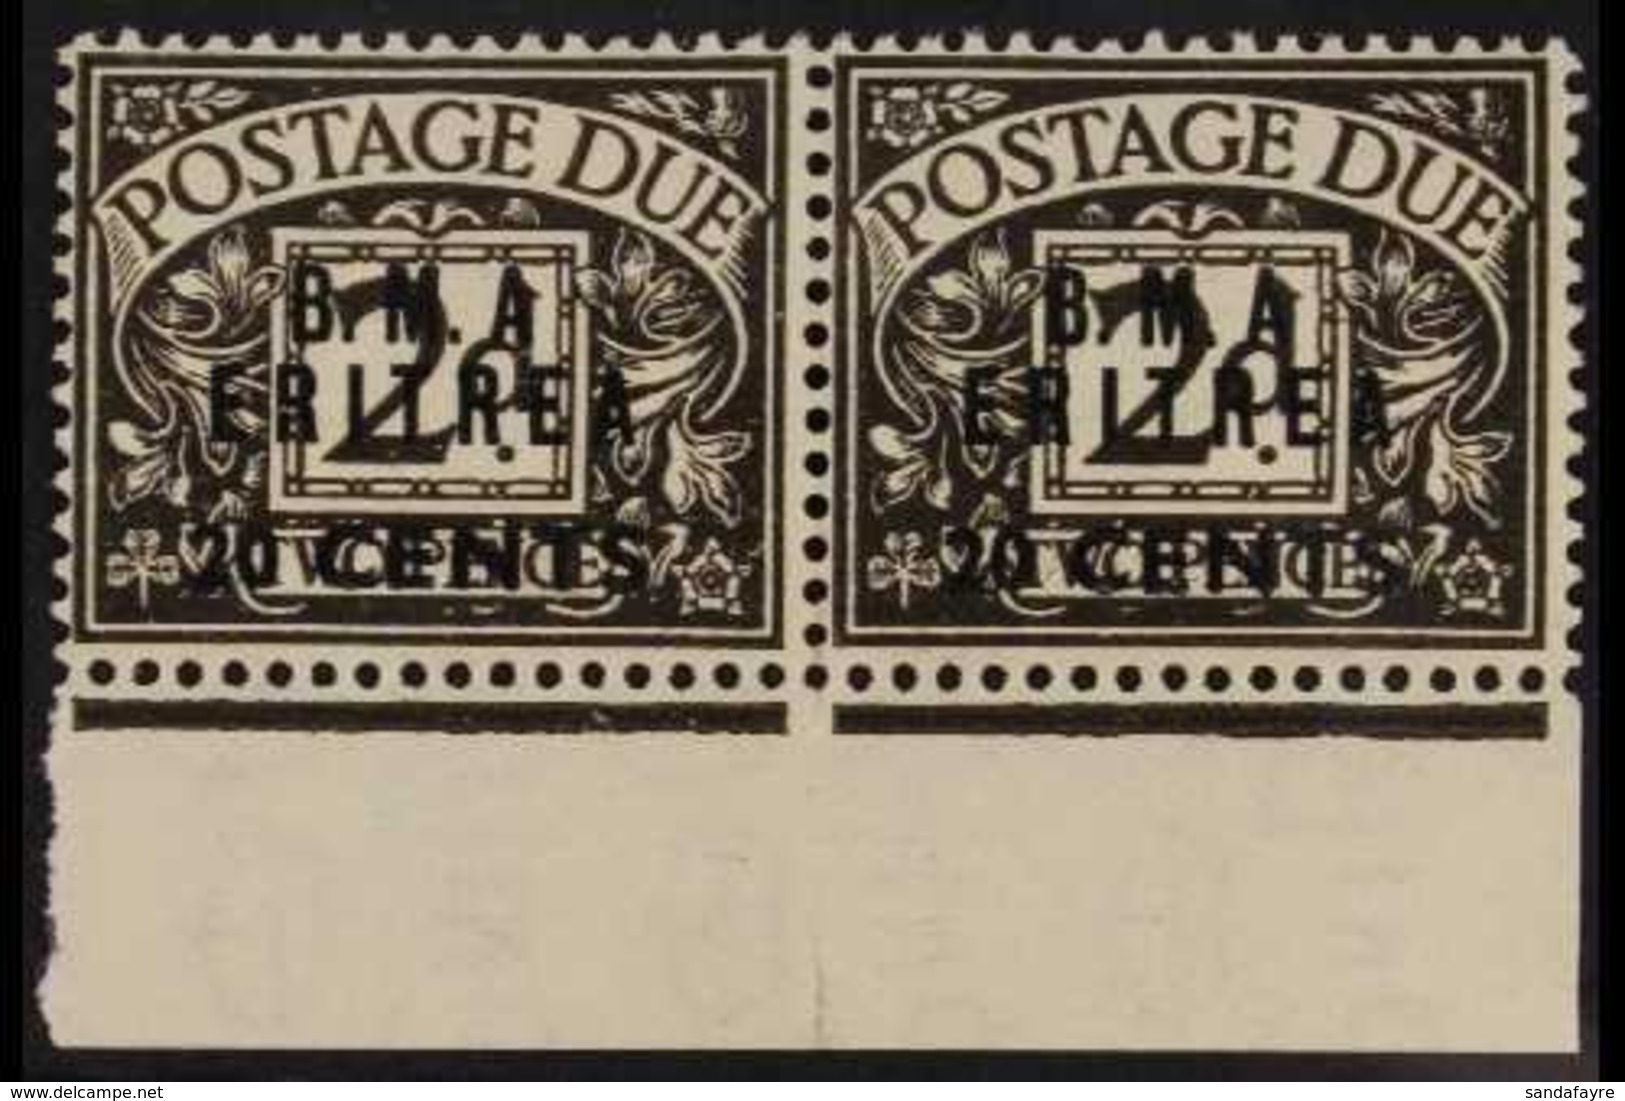 ERITREA  POSTAGE DUES 1948 20c On 2d Agate, Horizontal Pair Both Showing Variety "No Stop After A", SG ED 3a, Very Fine  - Afrique Orientale Italienne